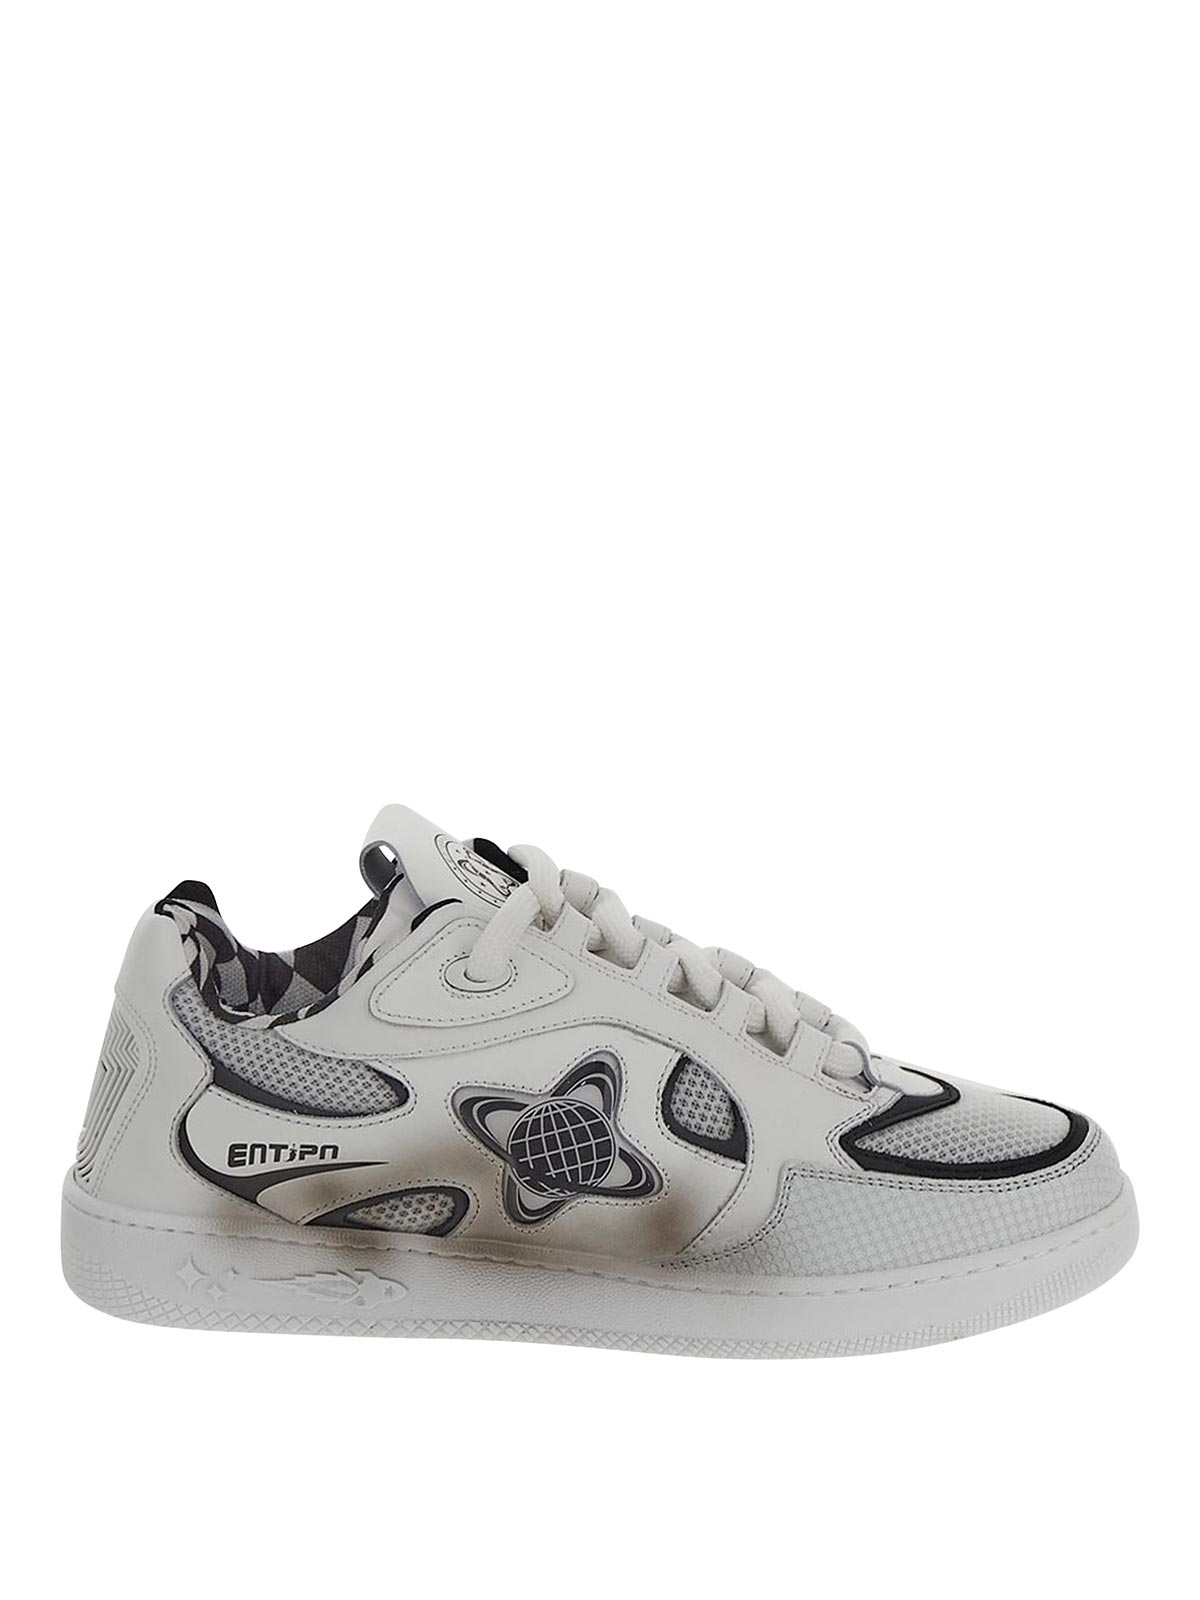 ENTERPRISE JAPAN LOW TOP SNEAKERS IN WHITE WITH BLACK